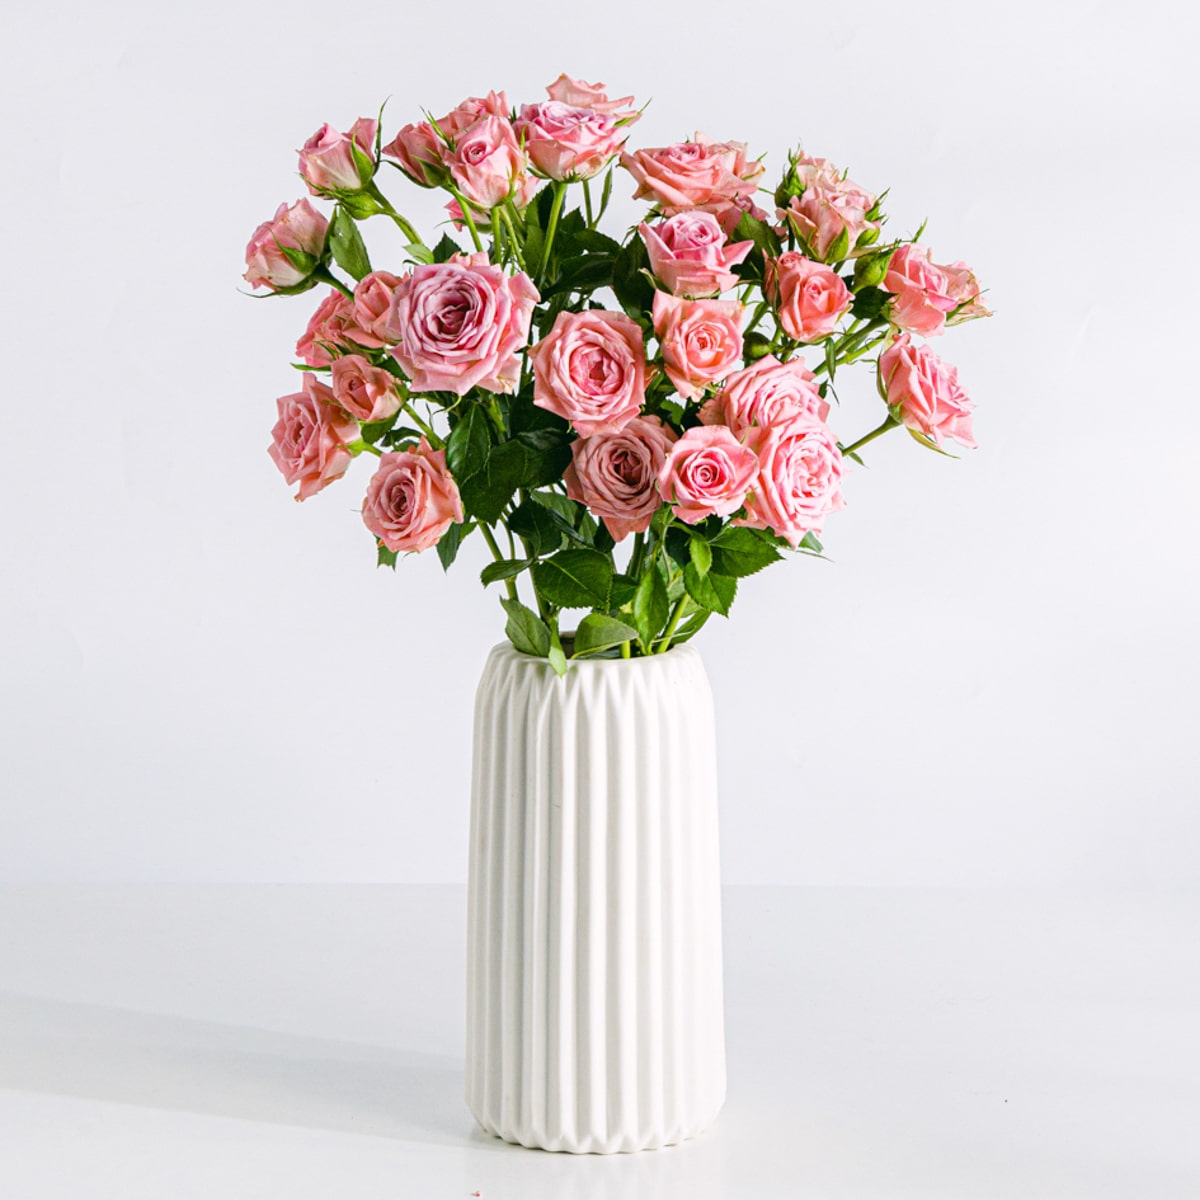 Soft pink rose flower bouquet with vase